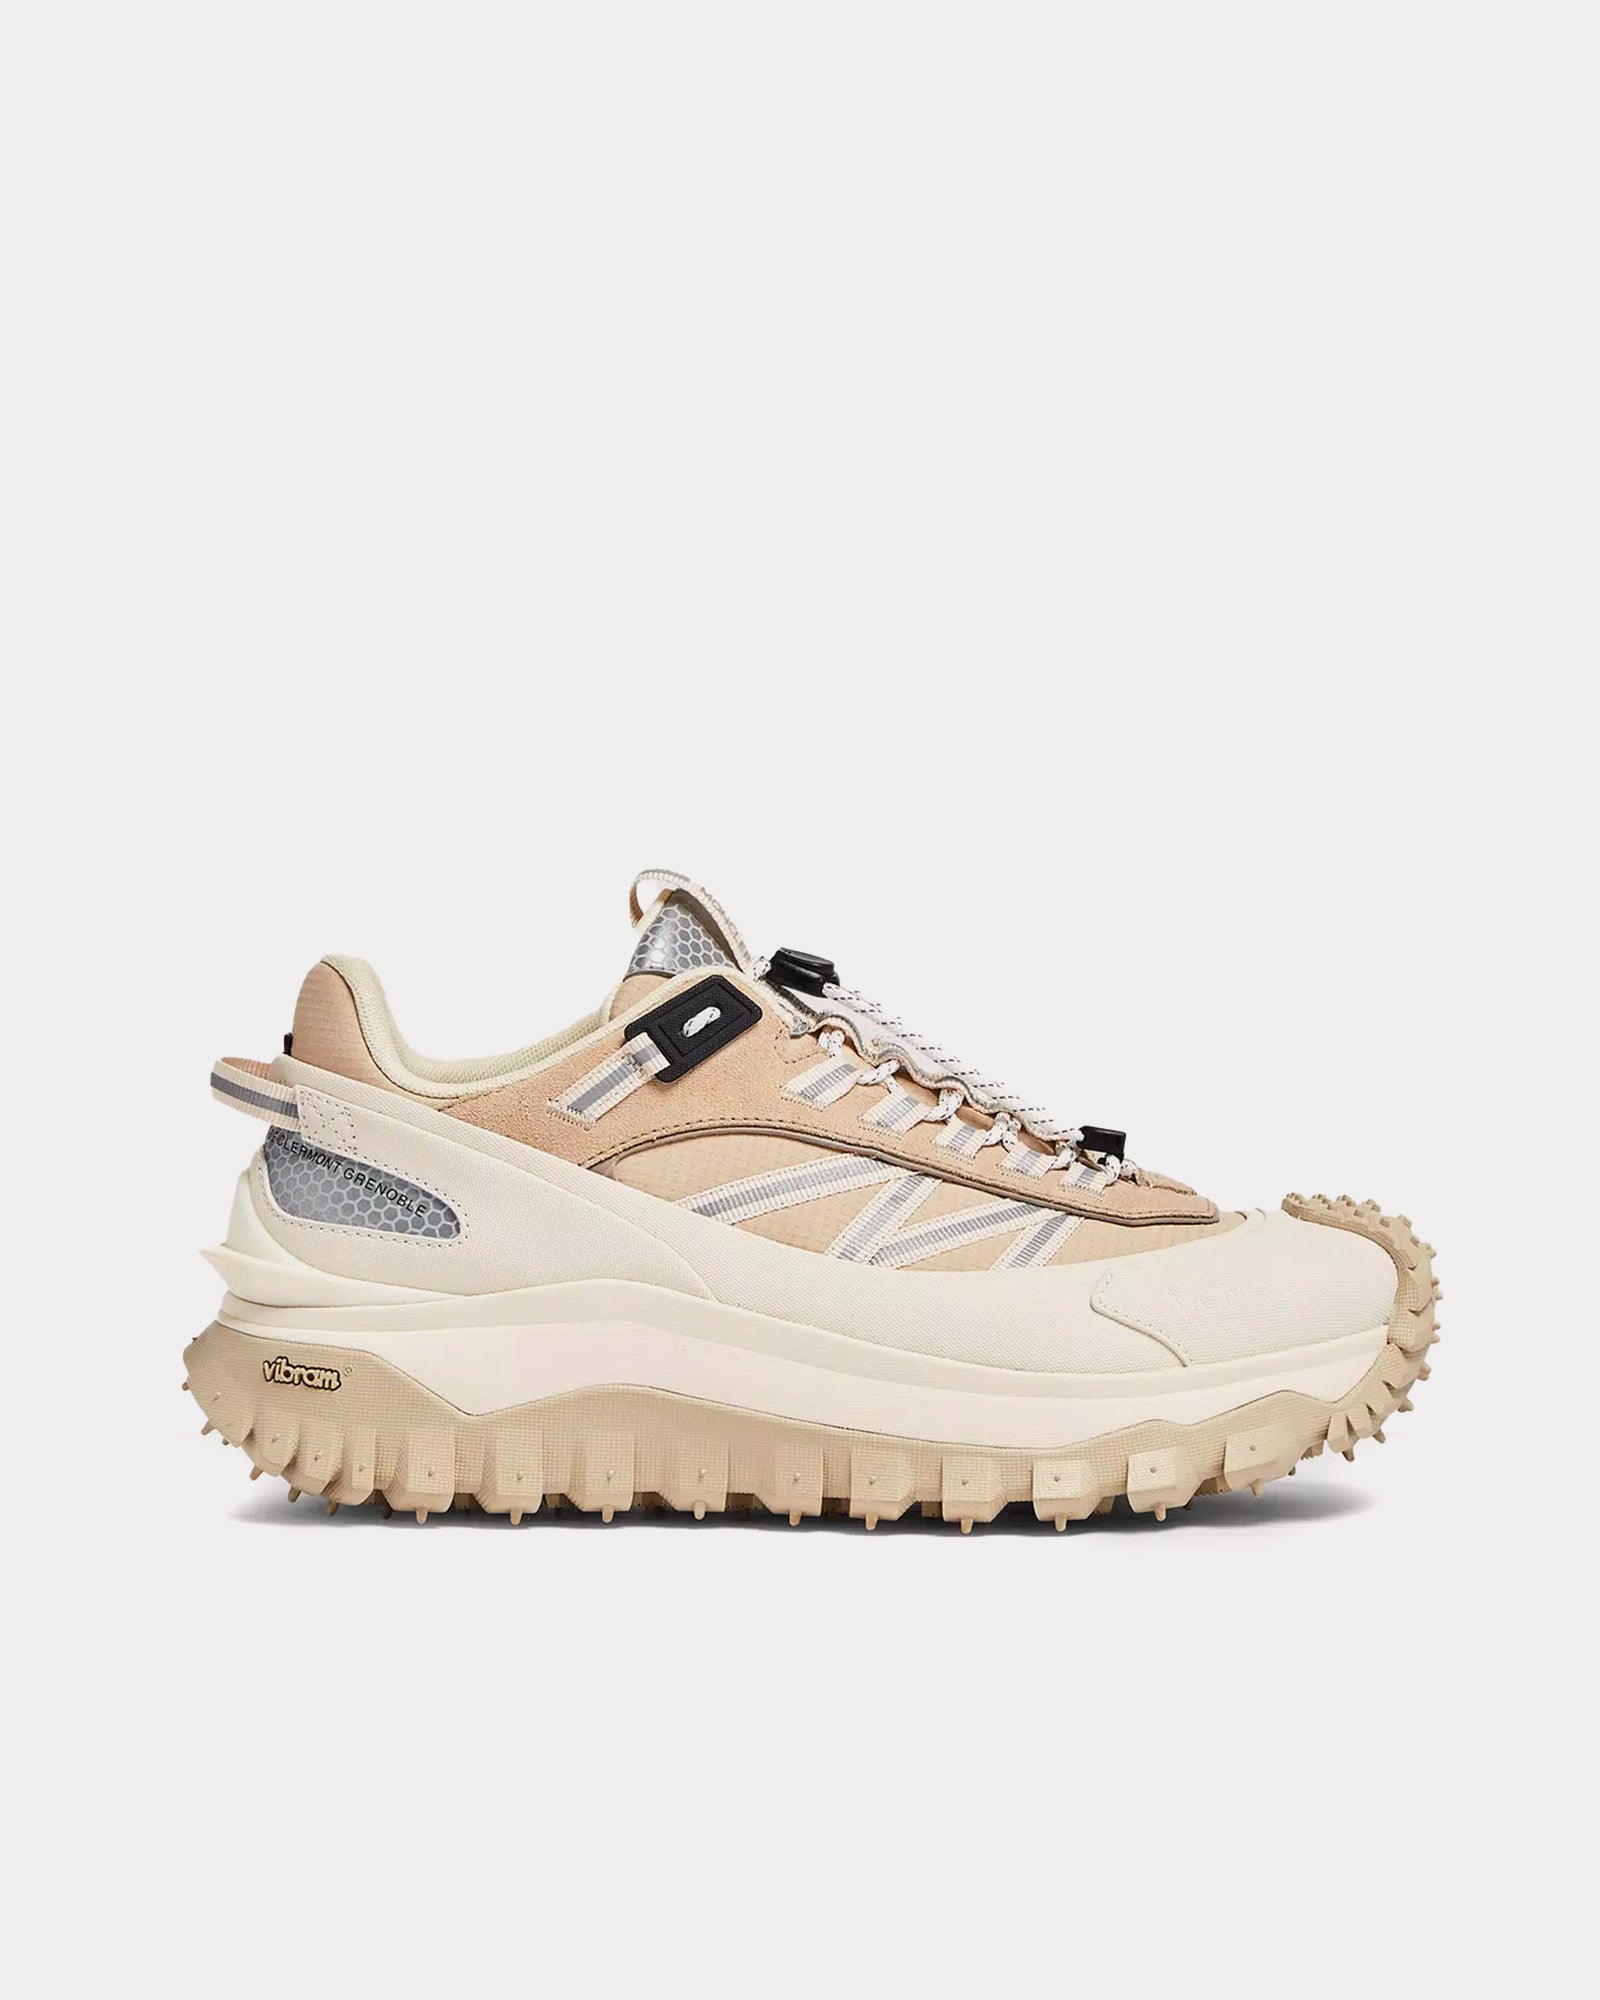 Moncler - Trailgrip Suede & Ripstop Beige / White Low Top Sneakers